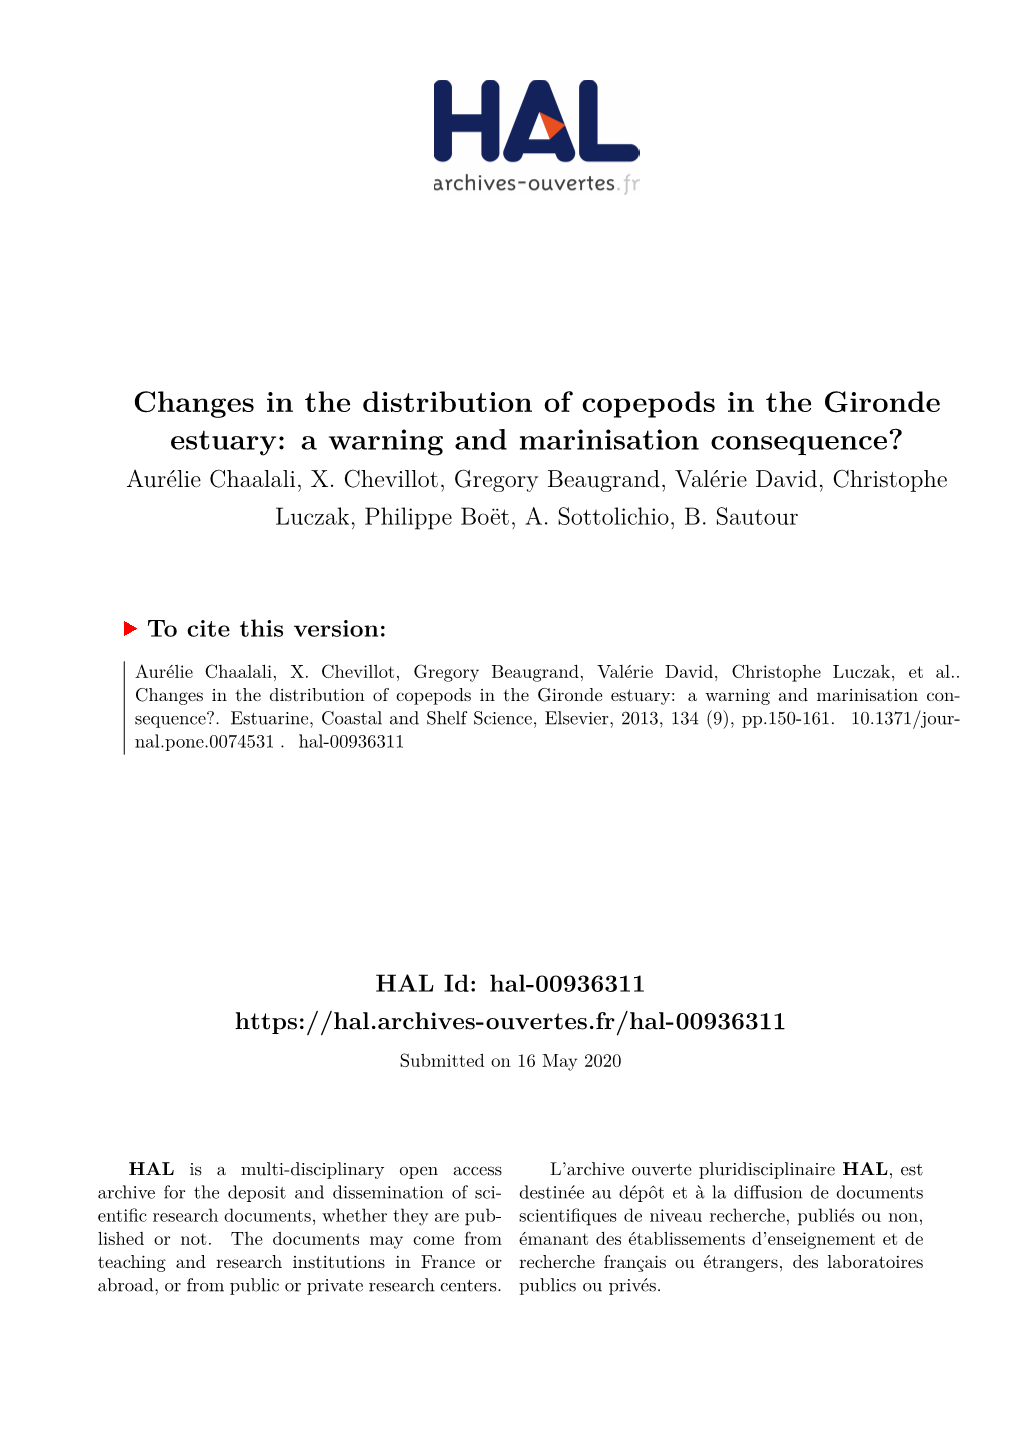 Changes in the Distribution of Copepods in the Gironde Estuary: a Warning and Marinisation Consequence? Aurélie Chaalali, X